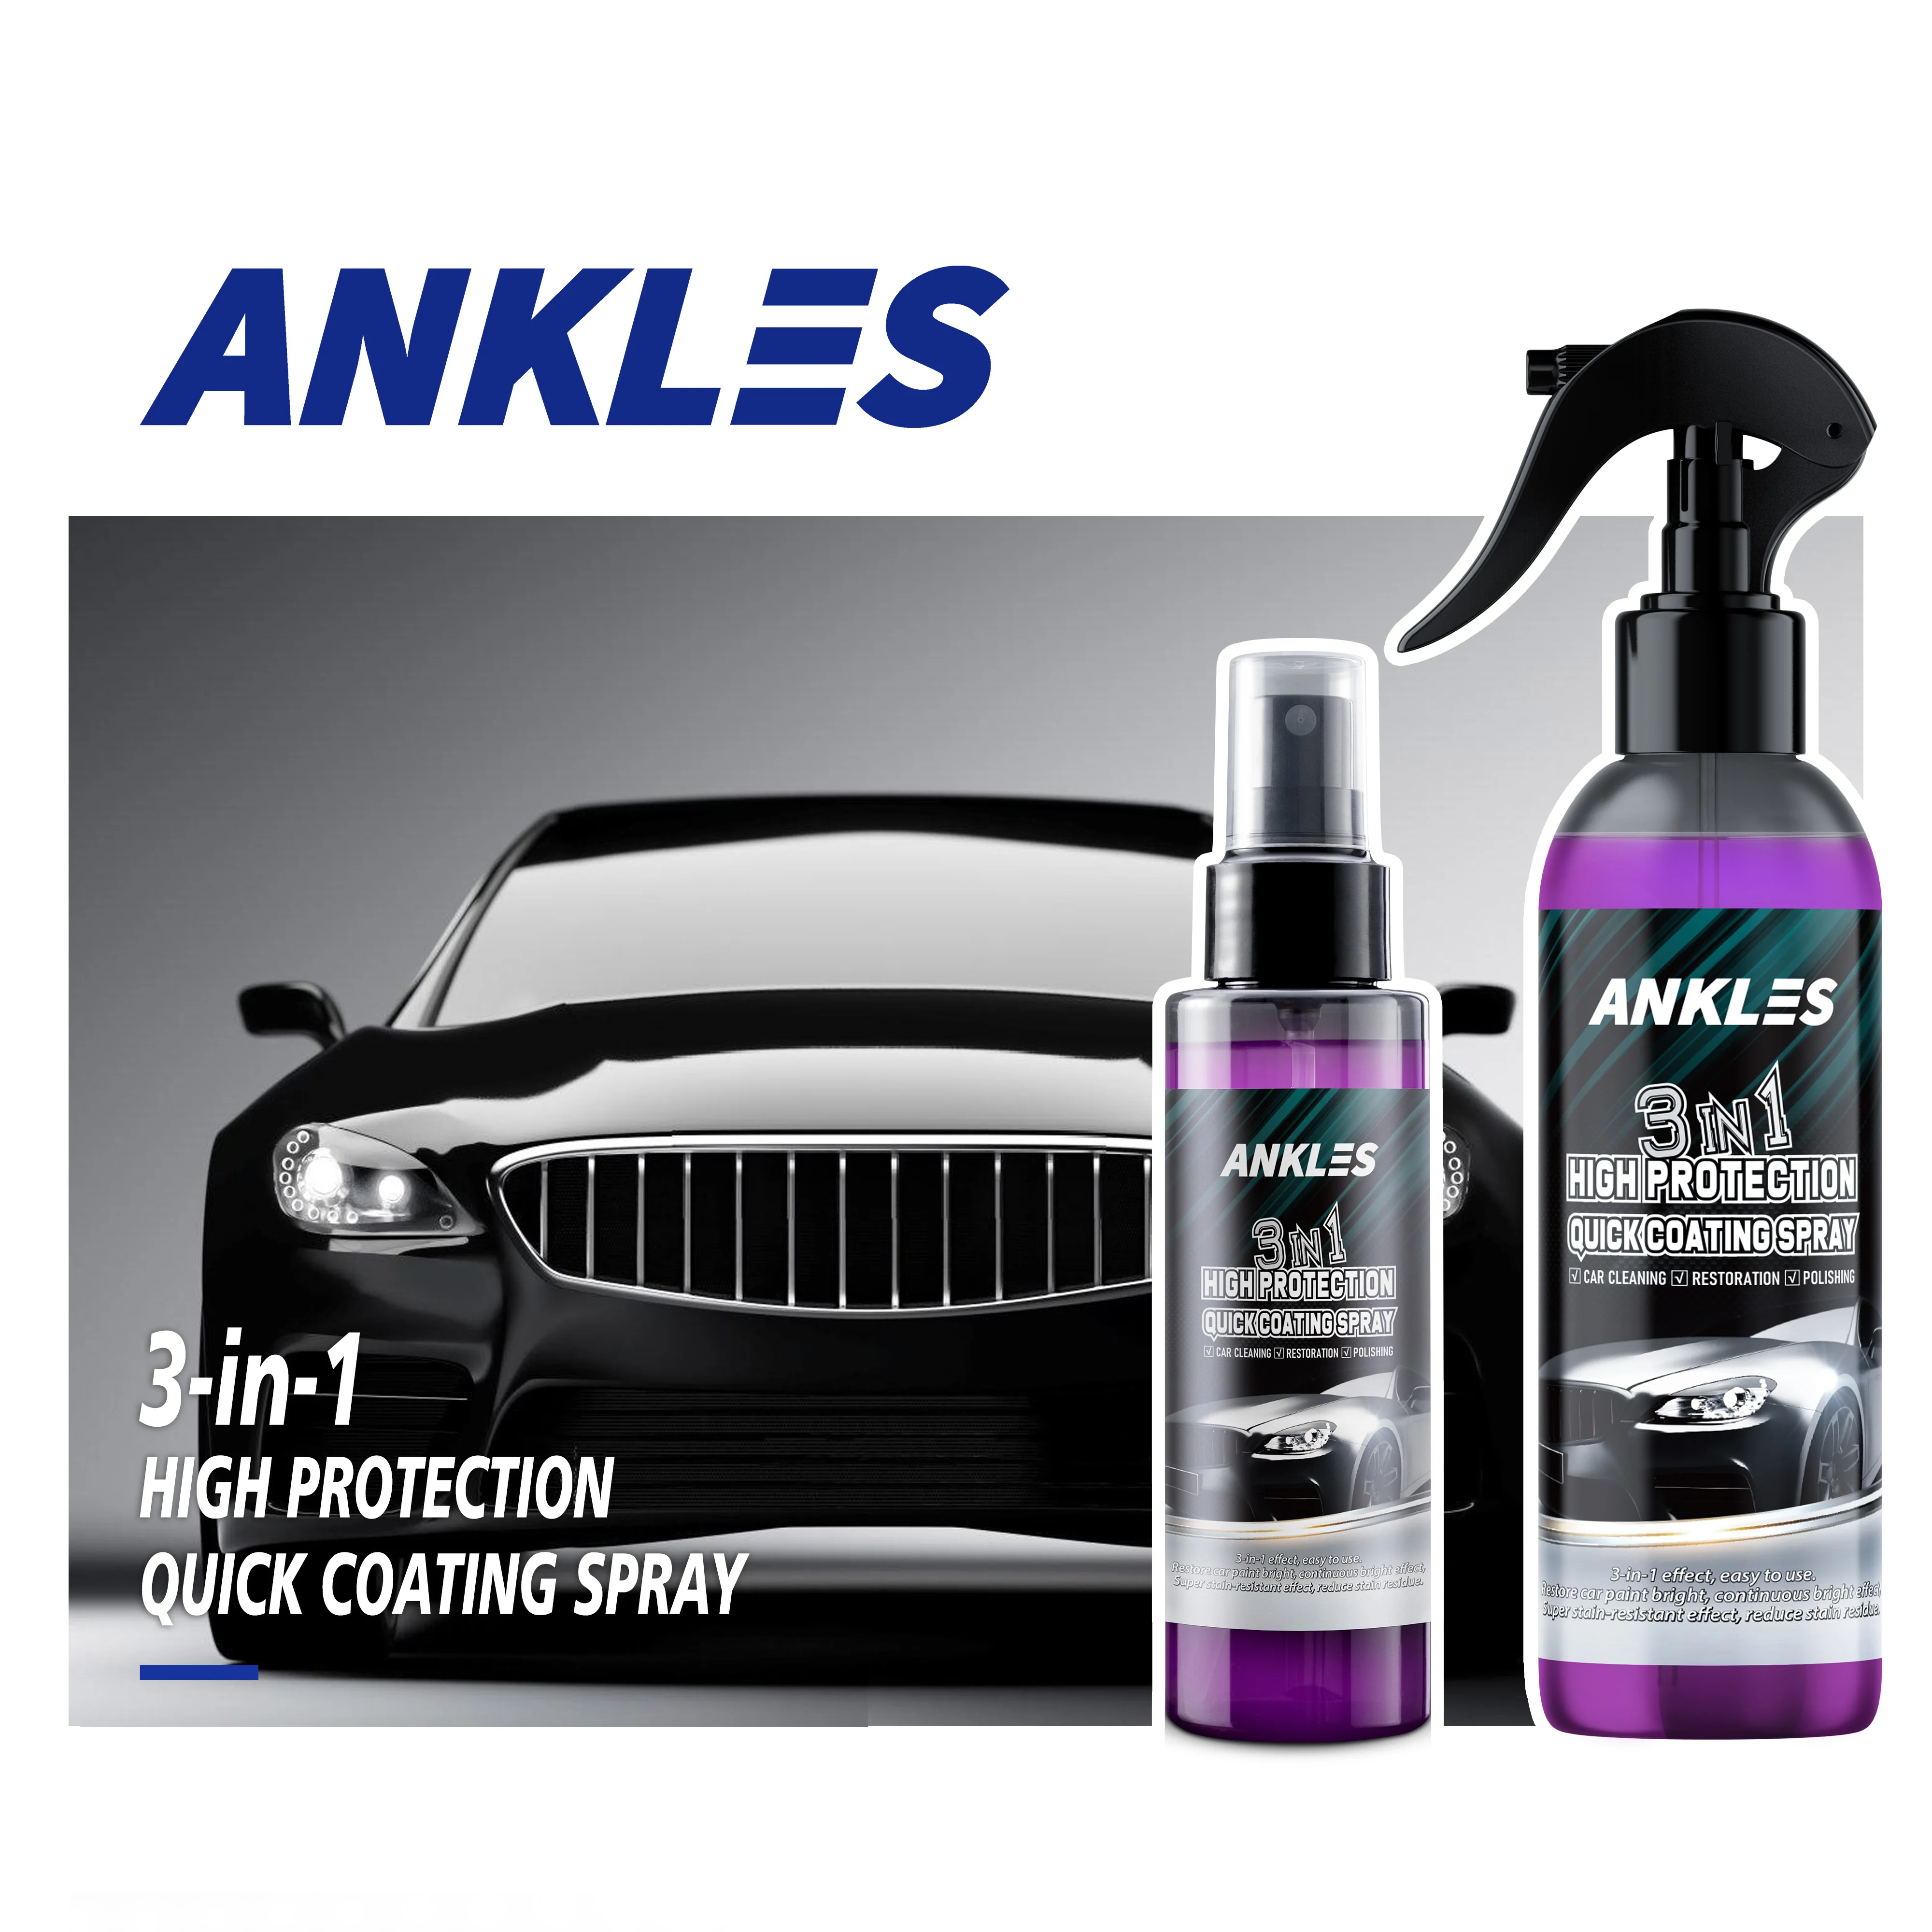 ANKLES 120ml Waterproof Polish Renew Foam Cleaner Car Coating Spray 3 in 1  High Protection Quick Coating Spray